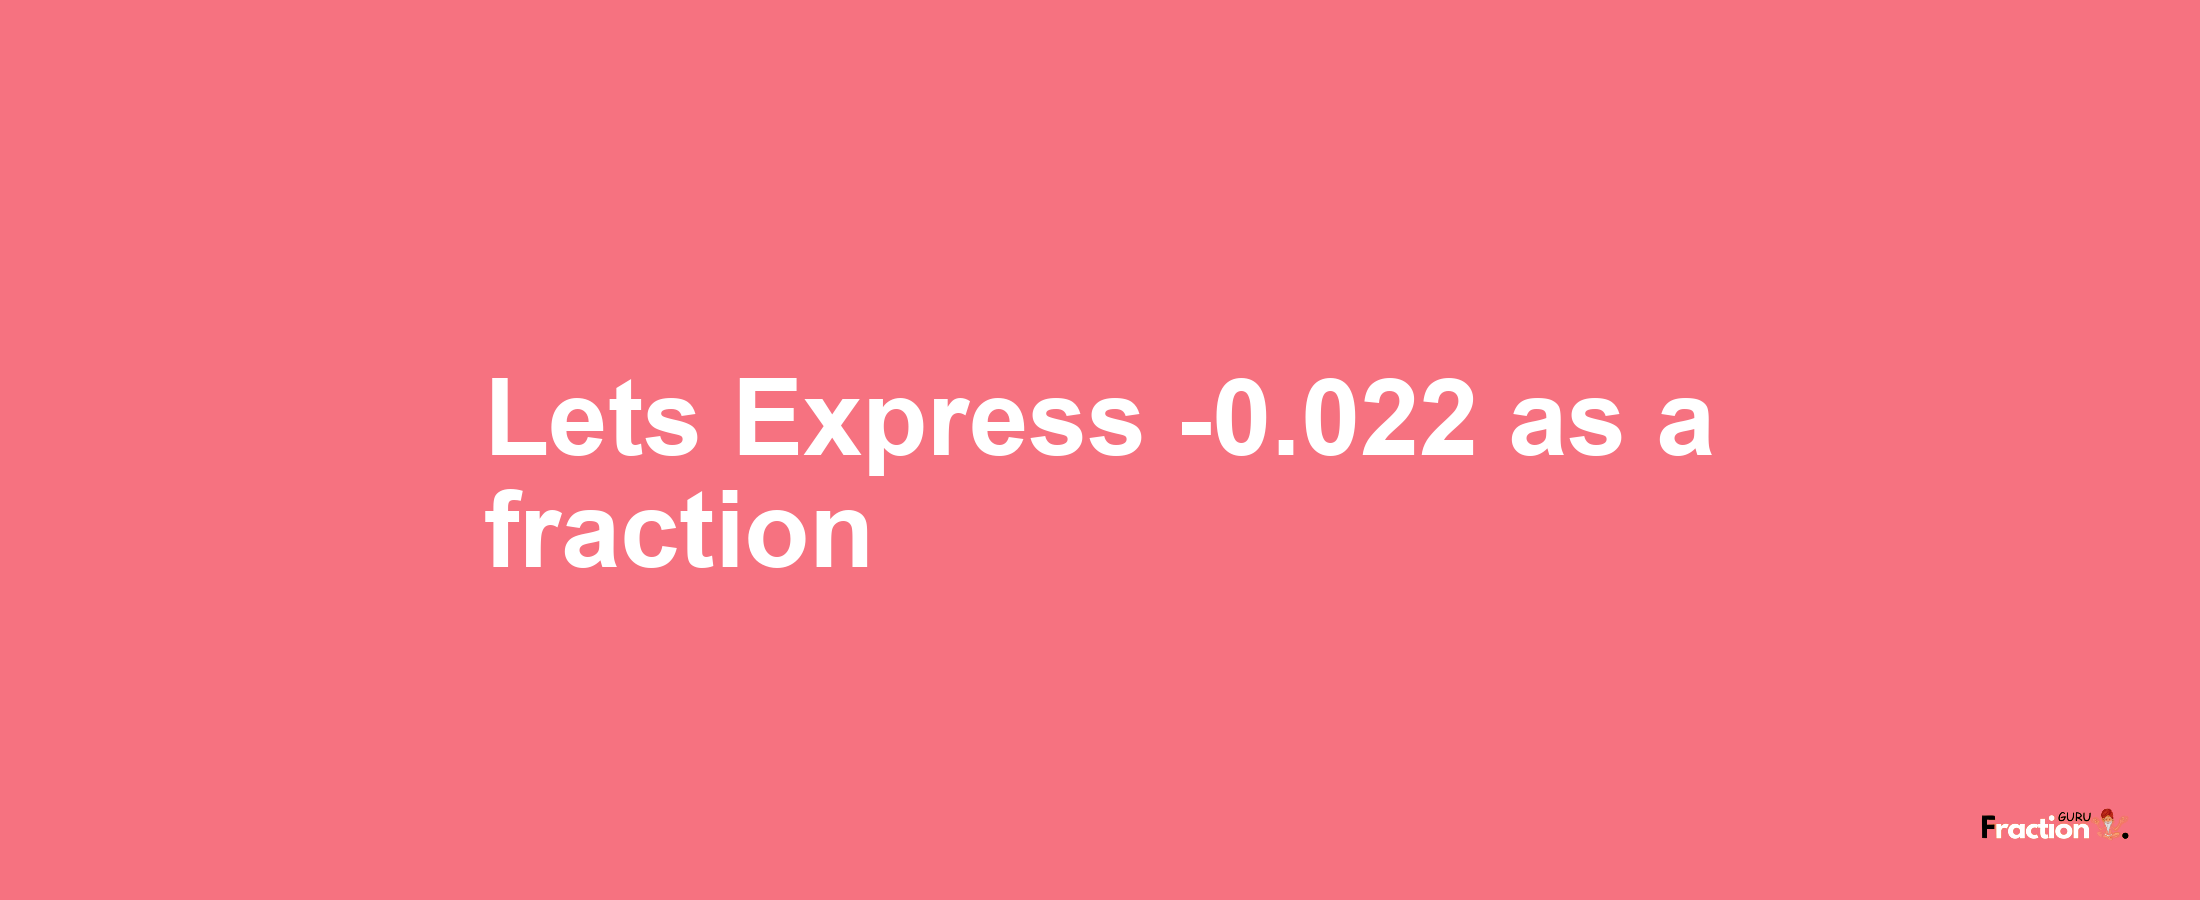 Lets Express -0.022 as afraction